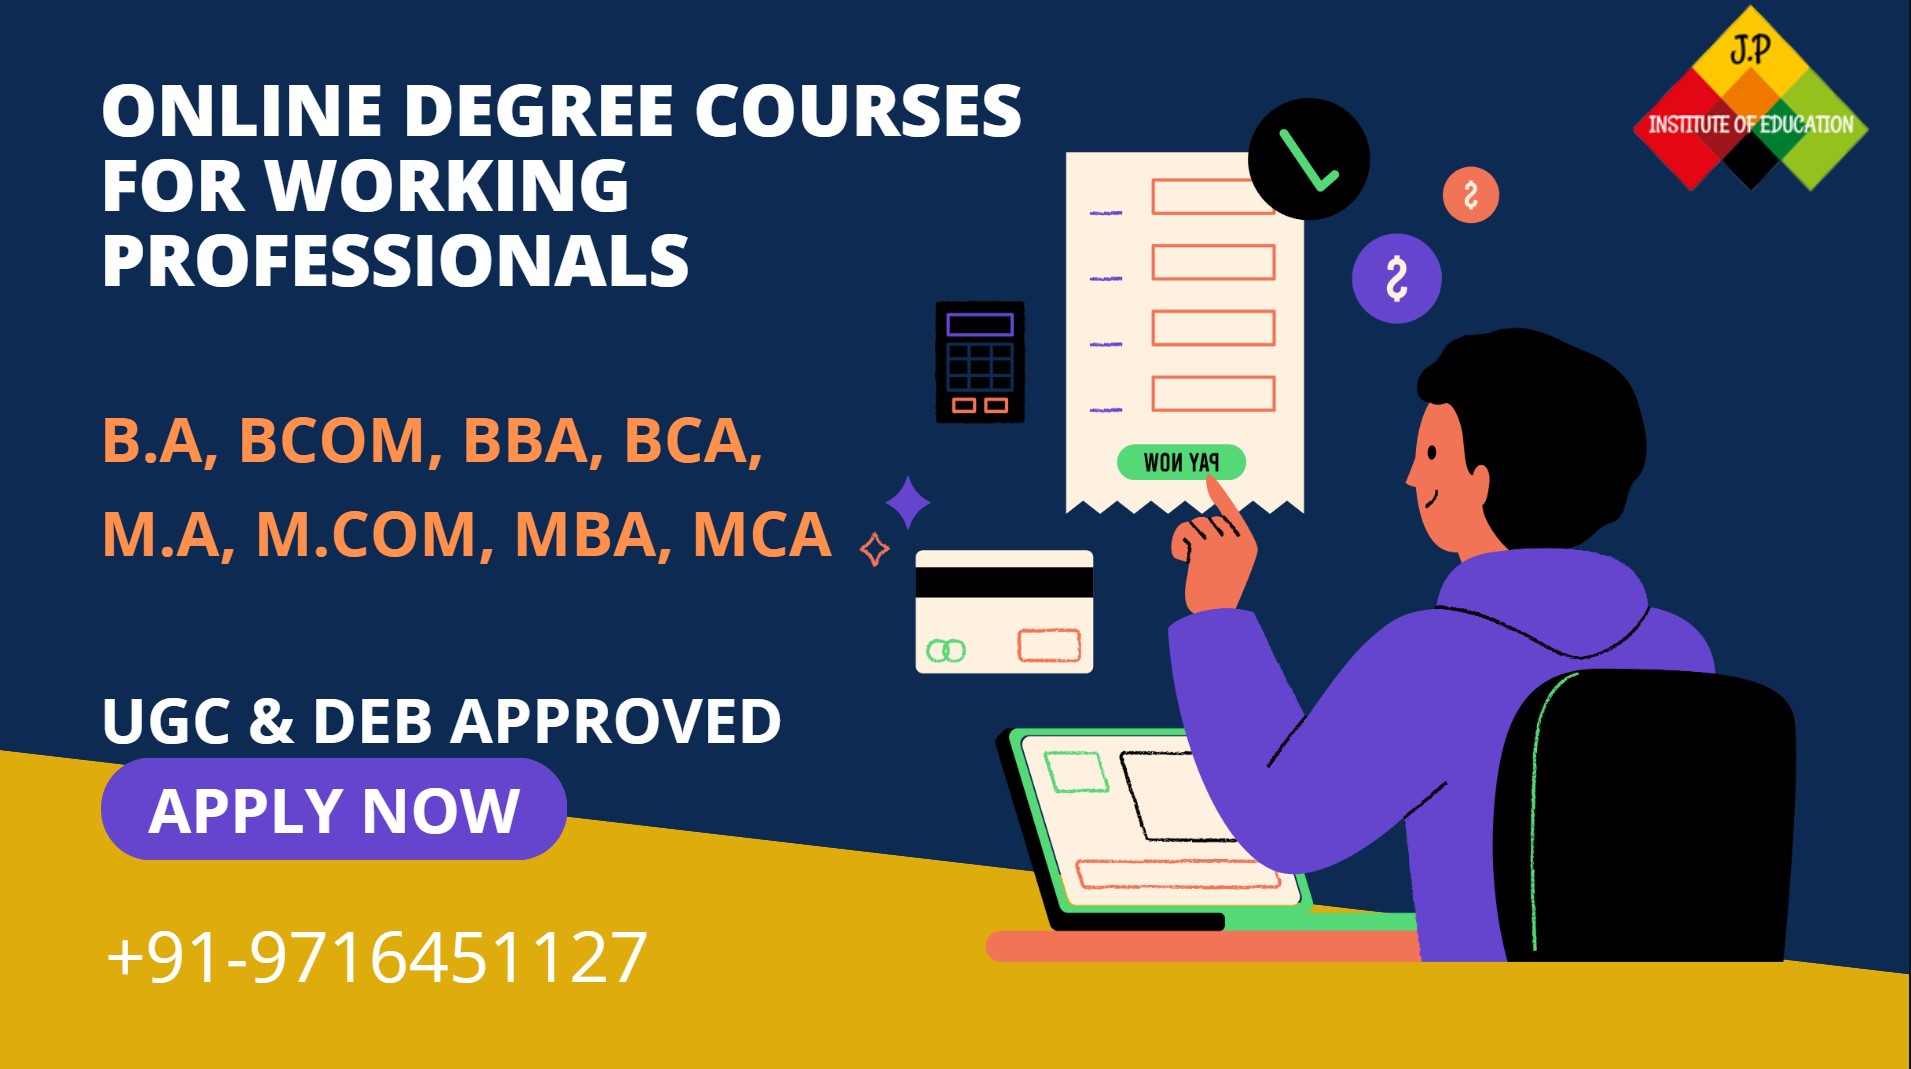 DEGREE COURSES FOR WORKING PROFESSIONALS